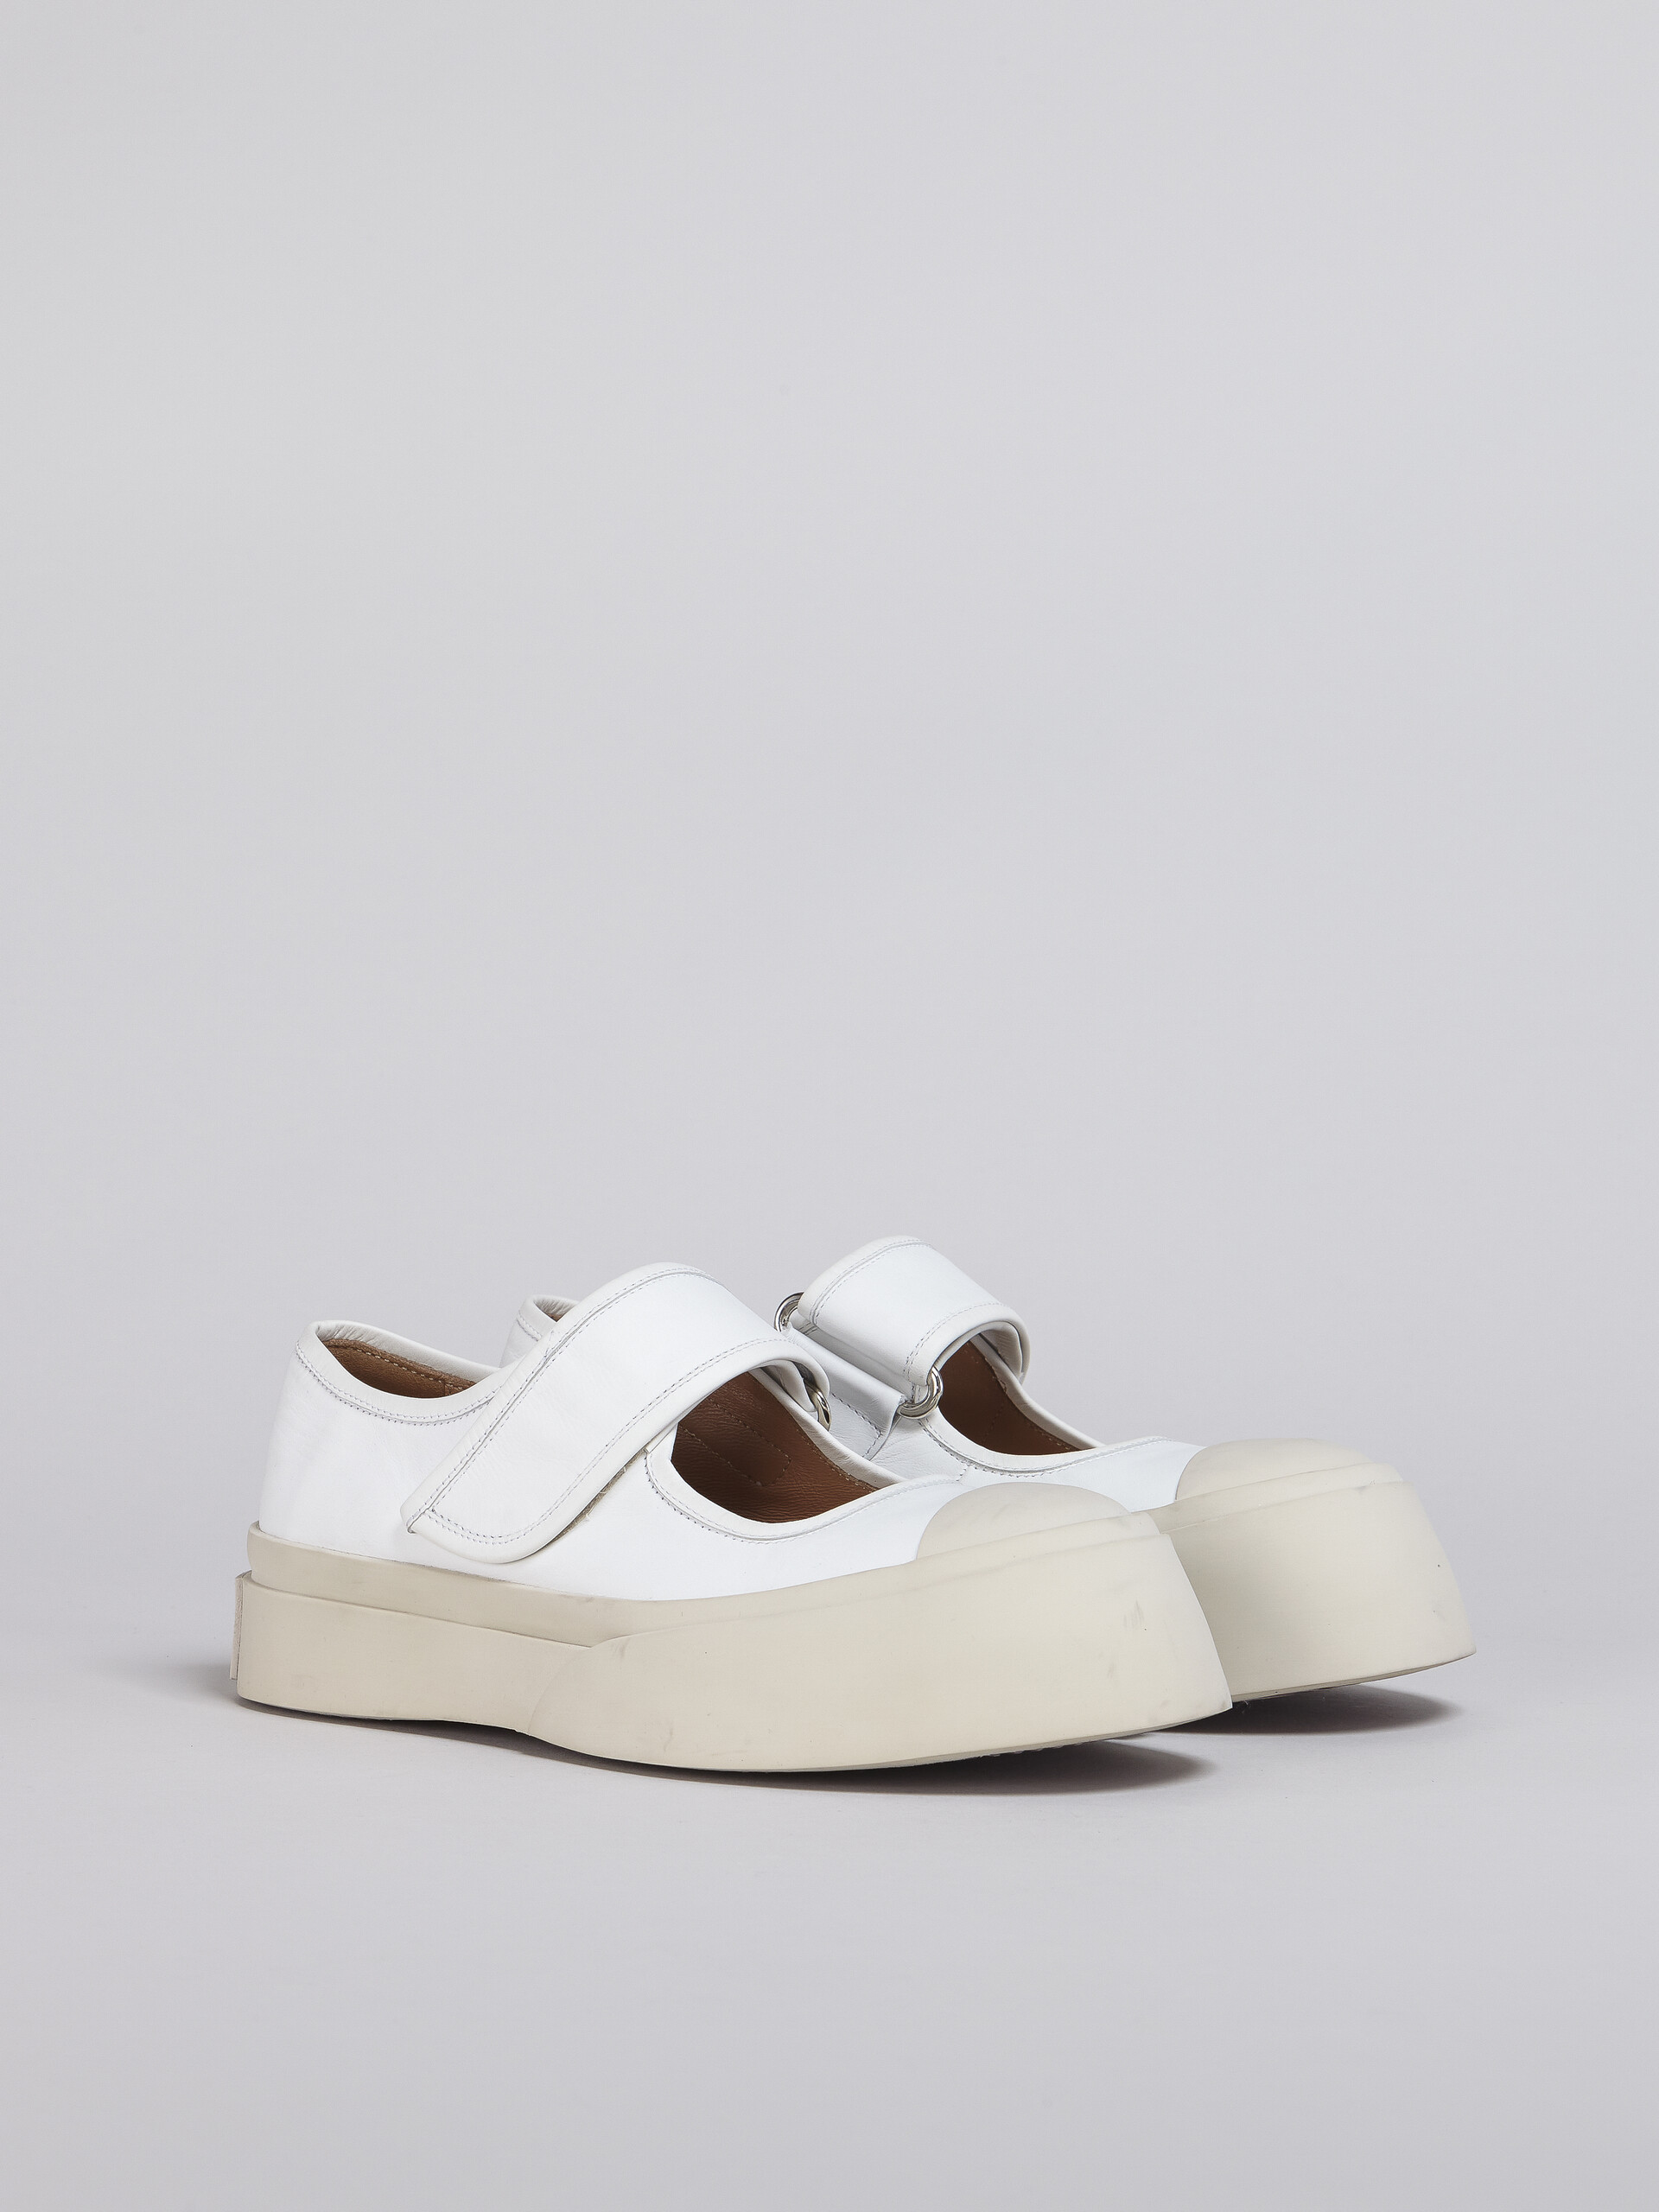 Calf leather PABLO Mary-Jane sneaker - Sneakers - Image 2